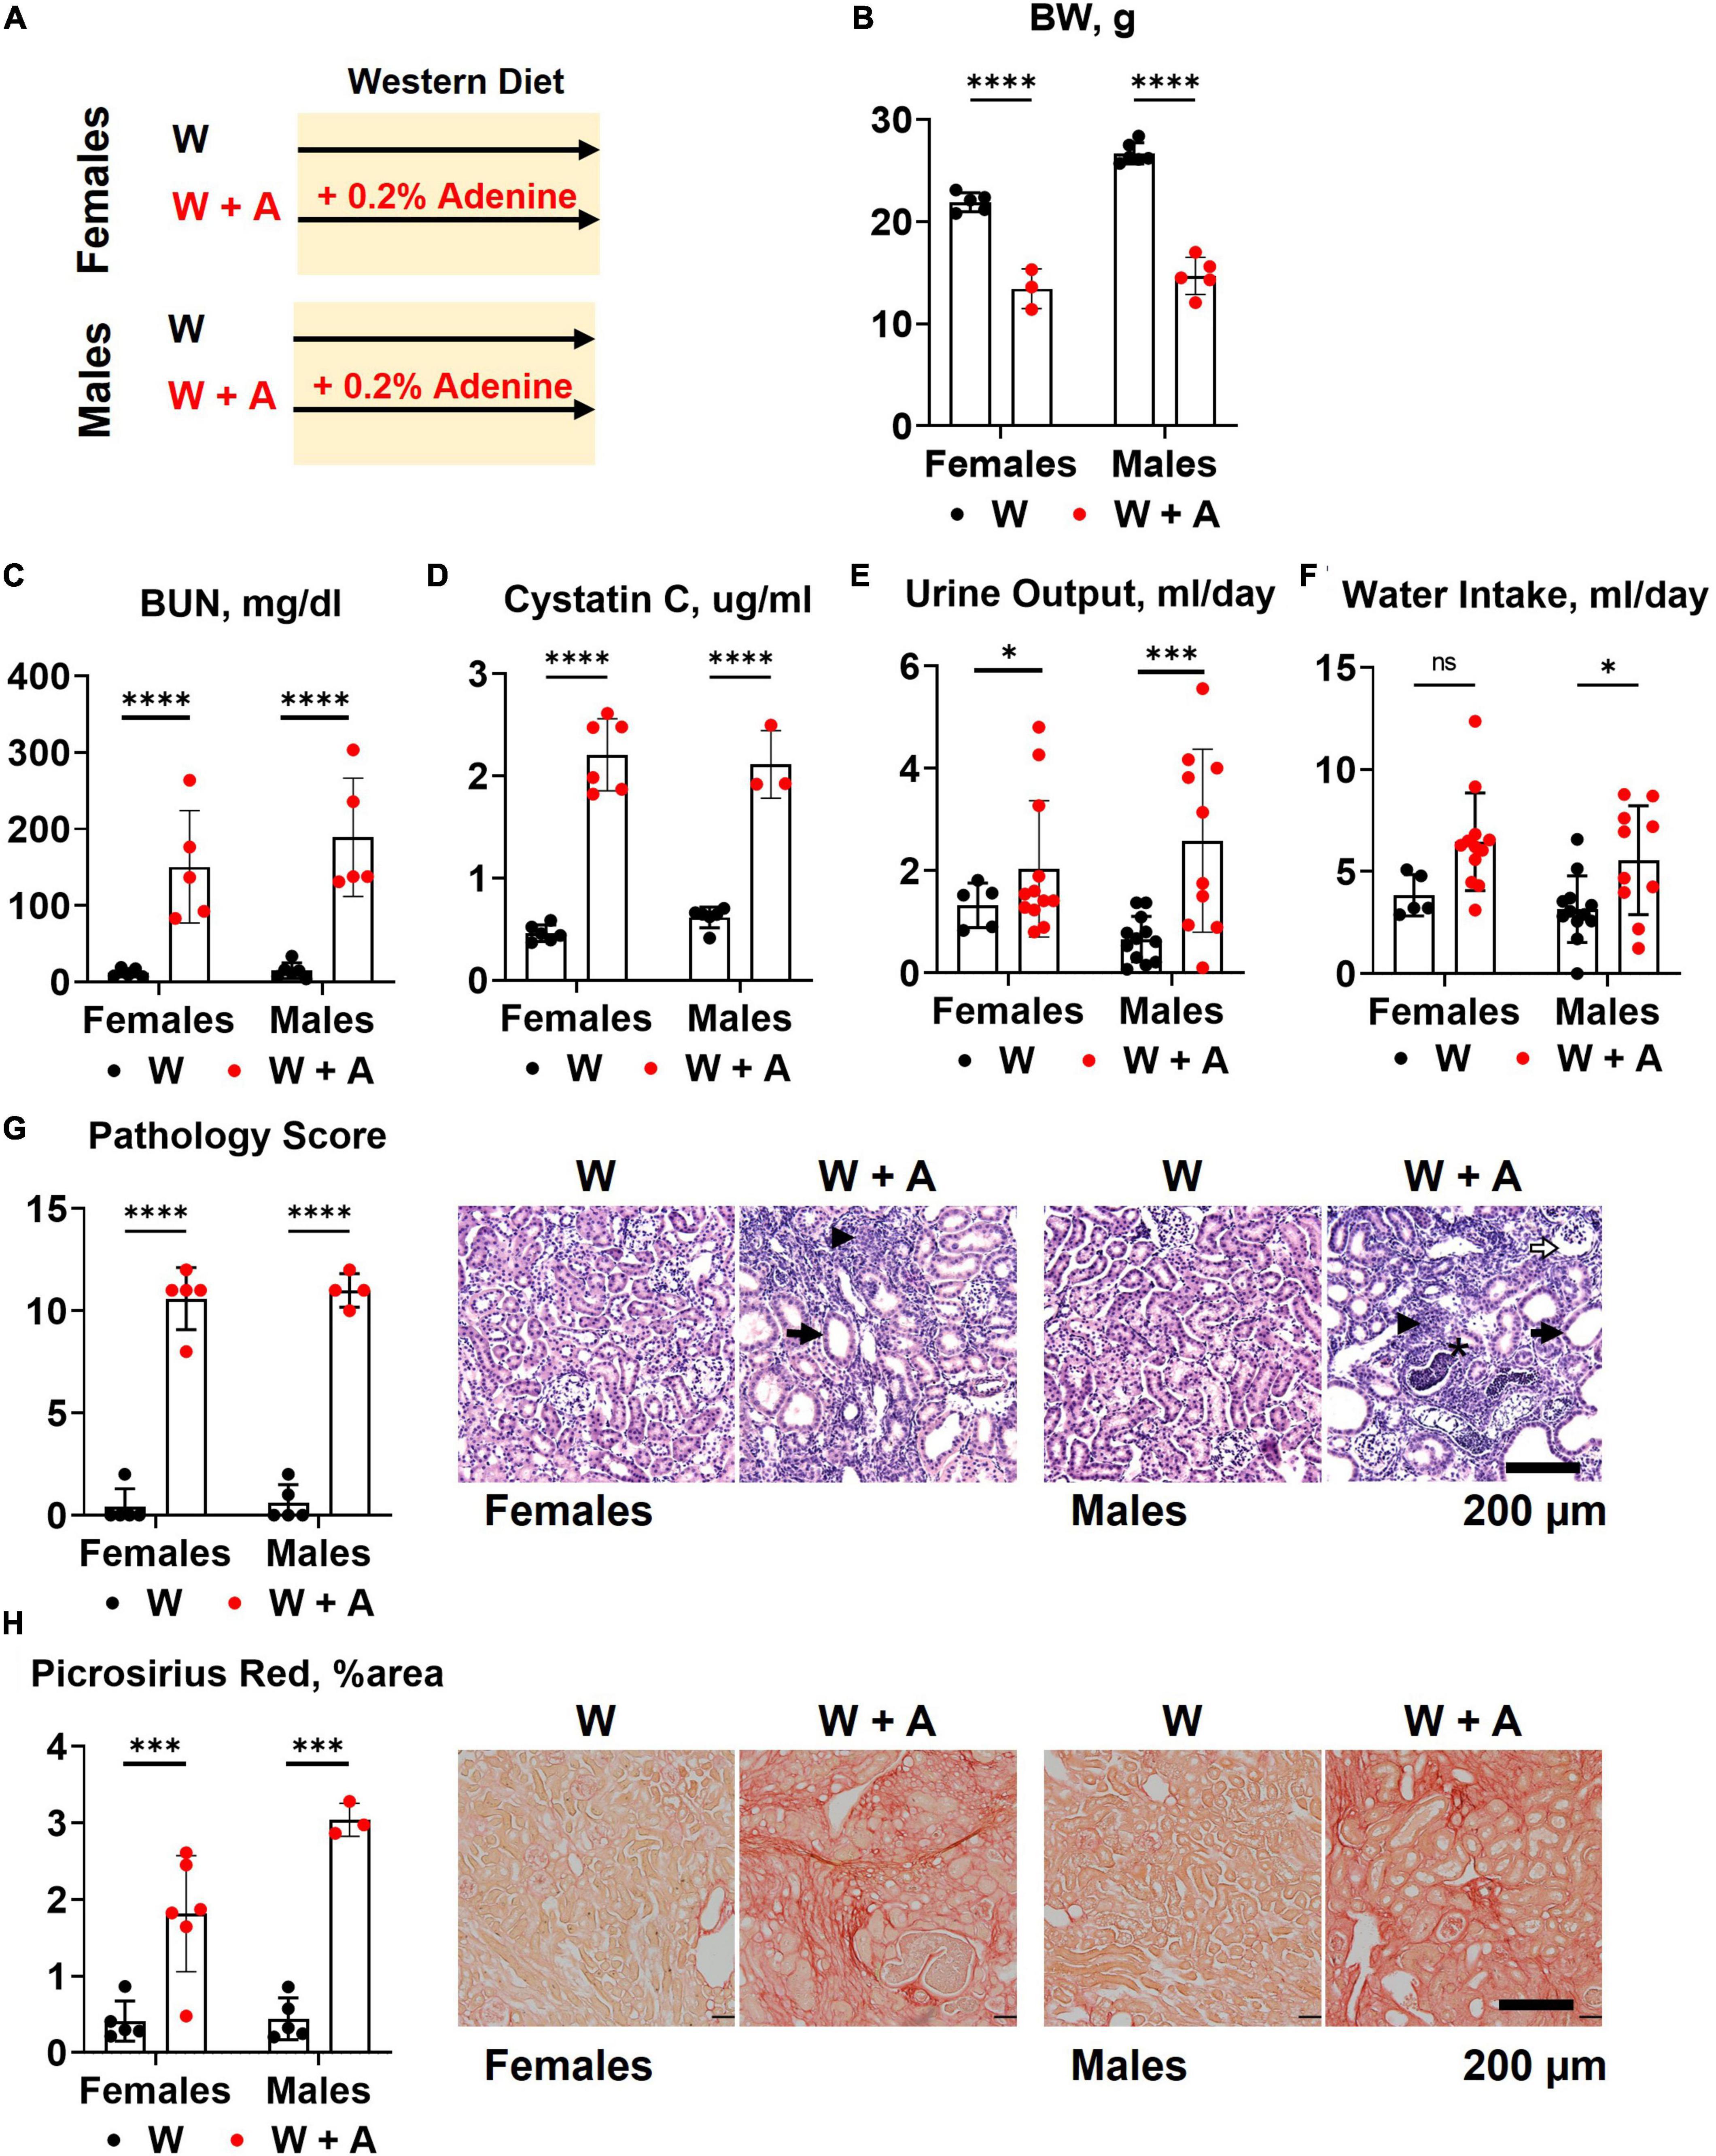 Paradoxical reduction of plasma lipids and atherosclerosis in mice with adenine-induced chronic kidney disease and hypercholesterolemia